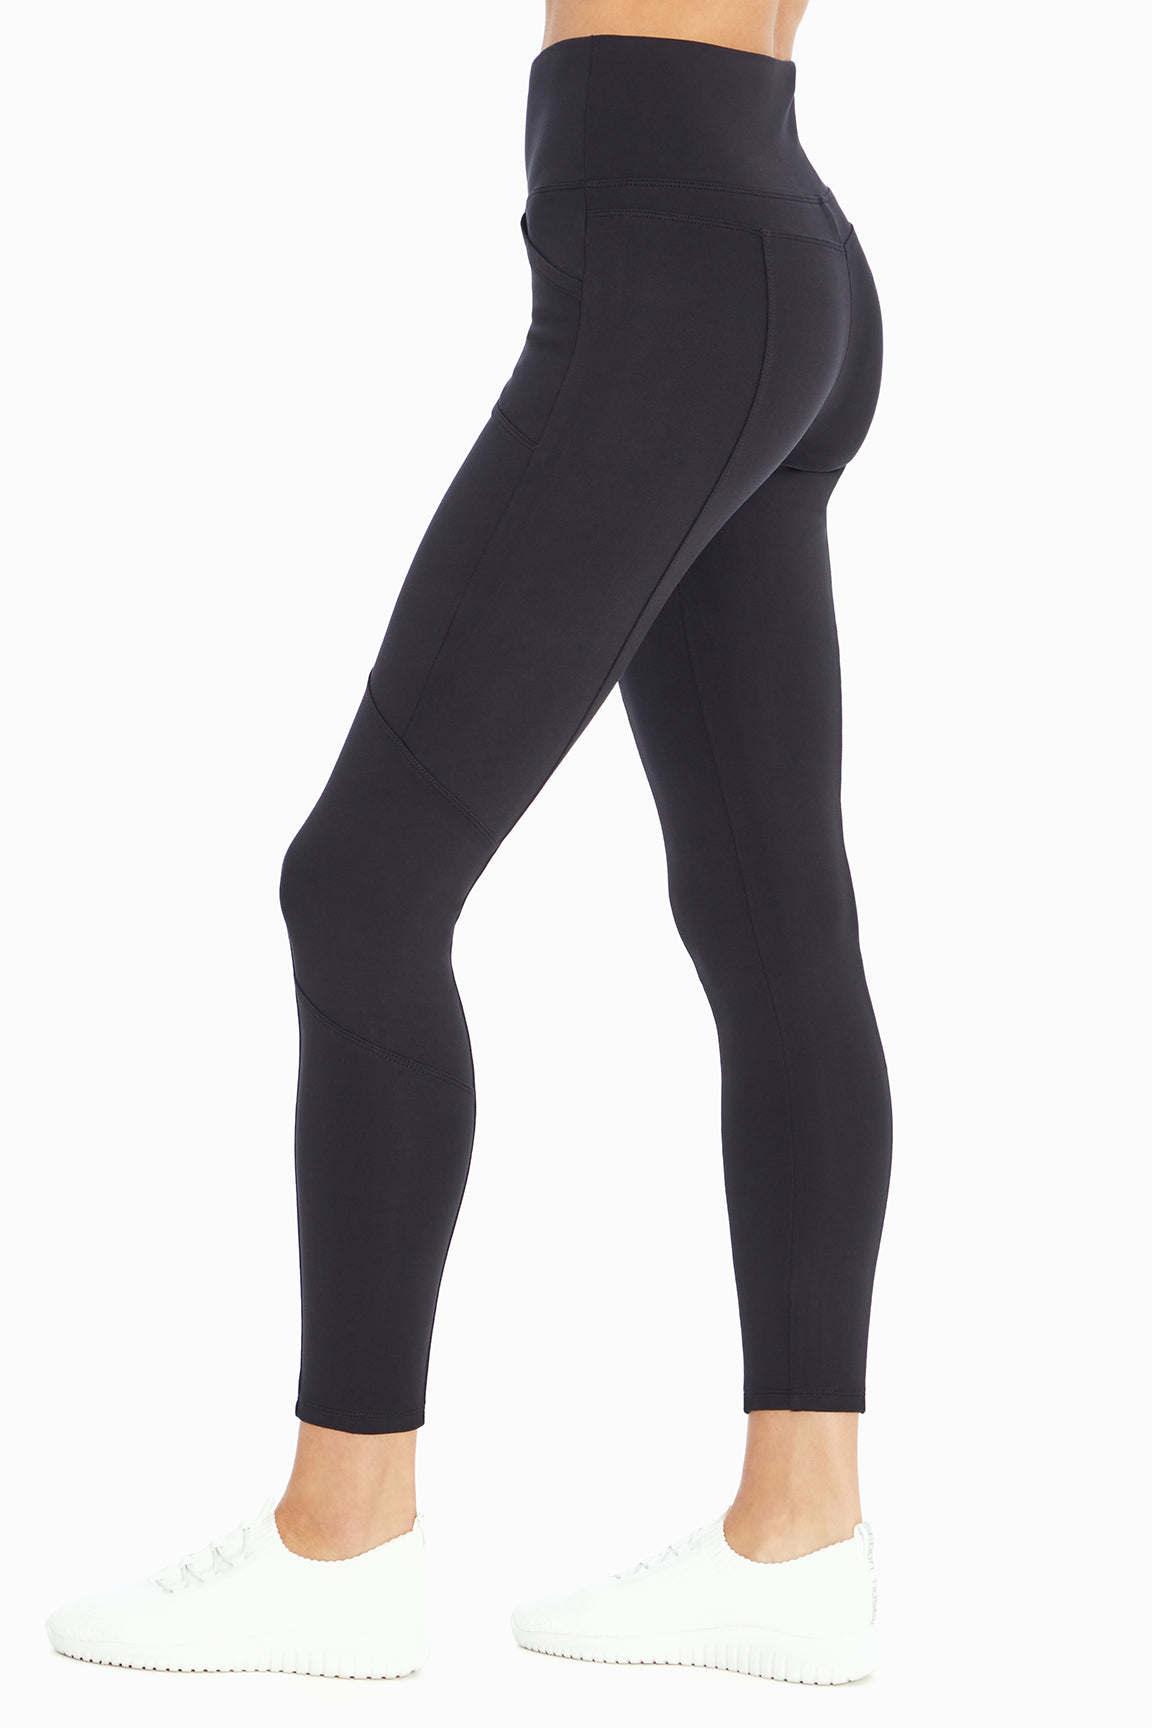 Marika  2 For $25 Leggings - Today Only! :: Southern Savers